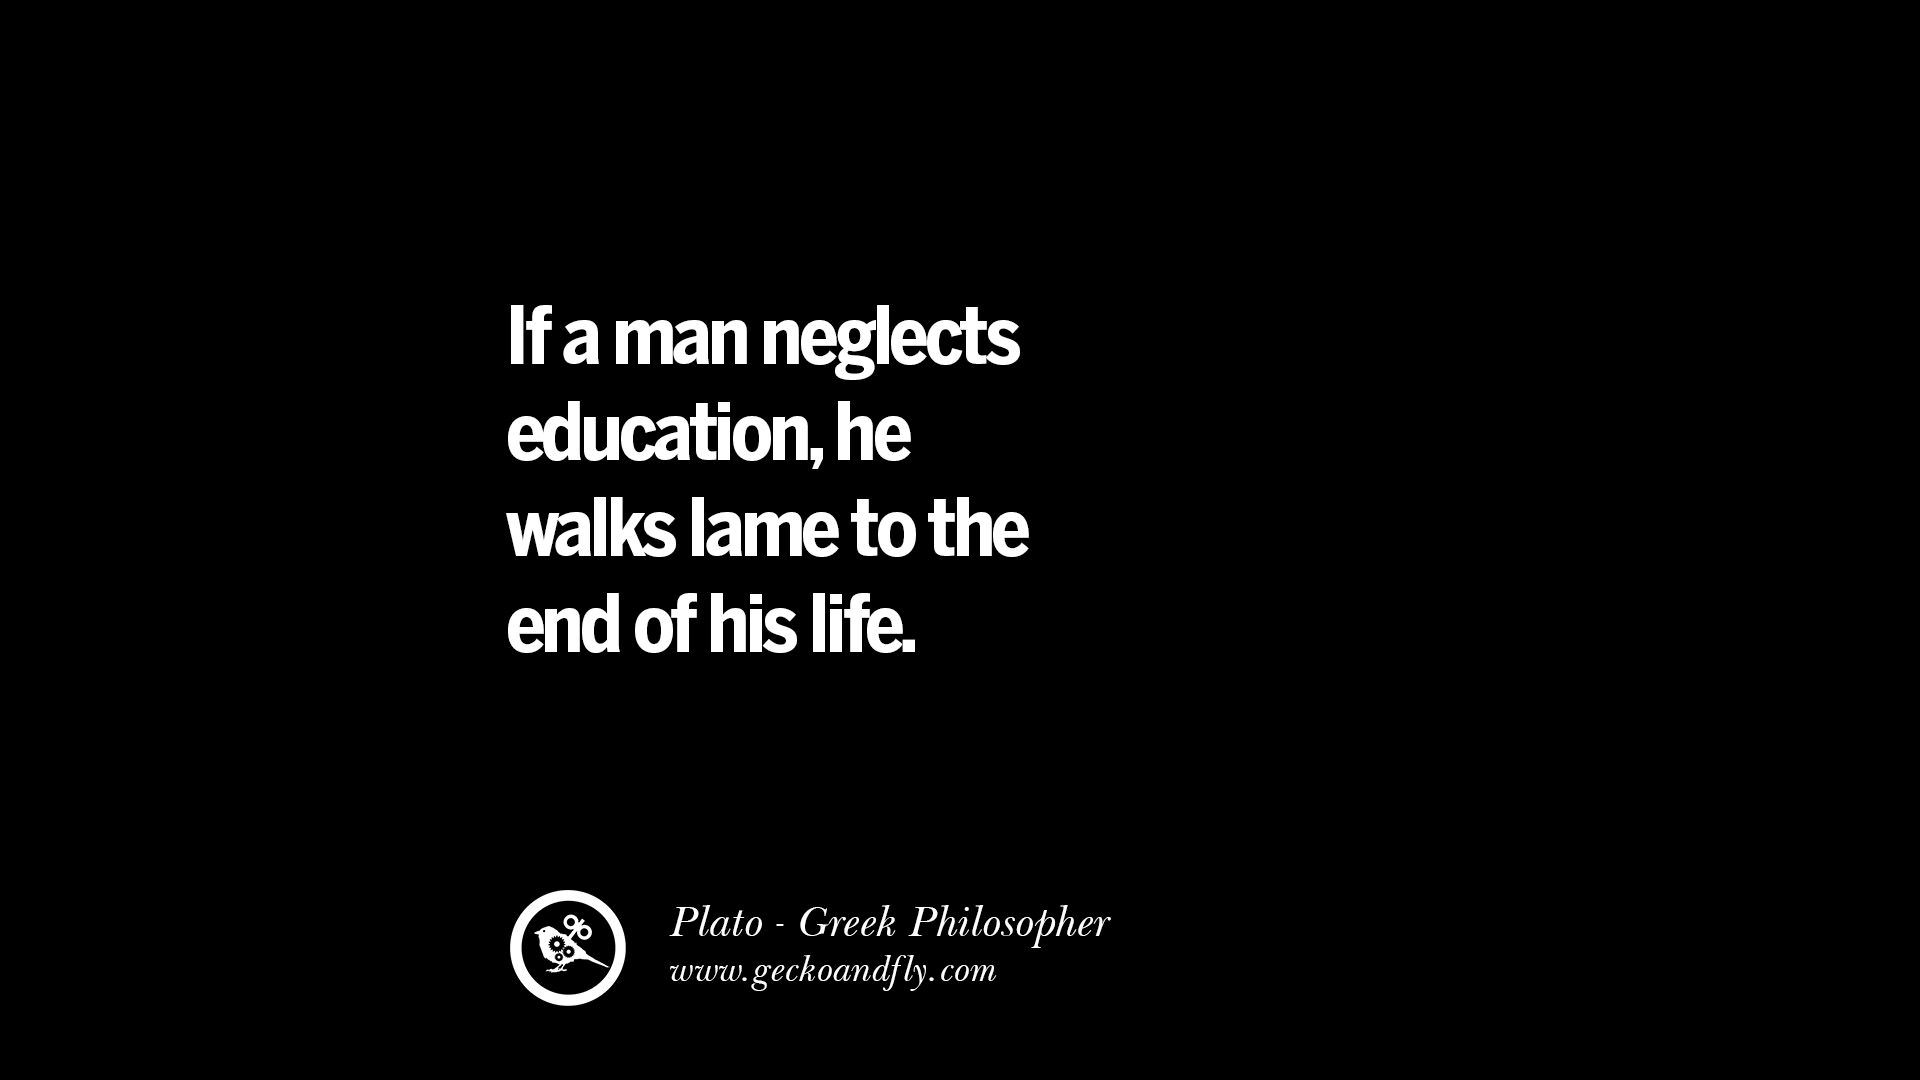 I a man neglects education he walks lame to the end of his life – Plato